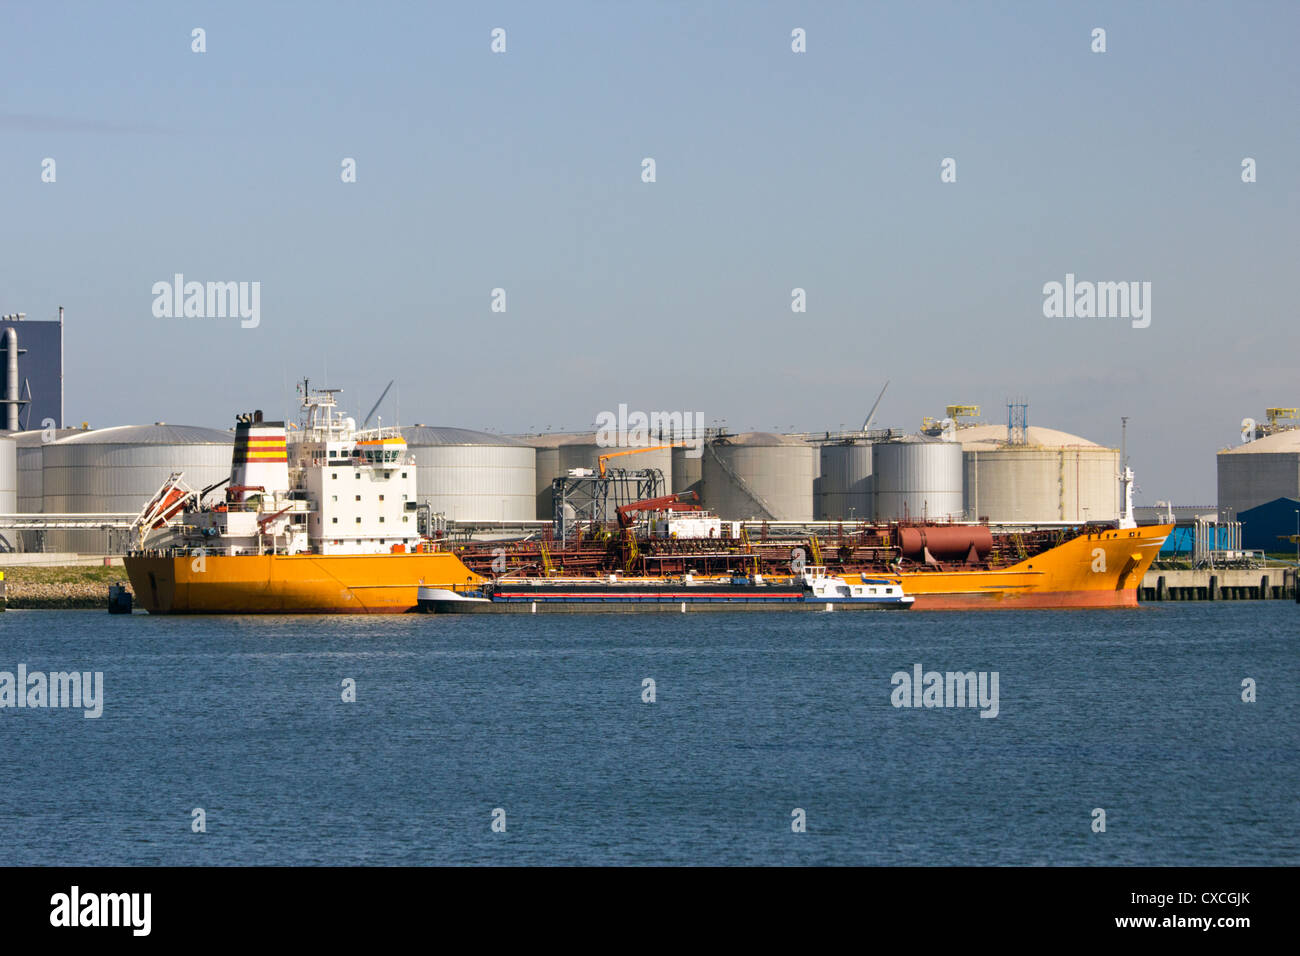 Oil tanker moored in the Port of Rotterdam Stock Photo